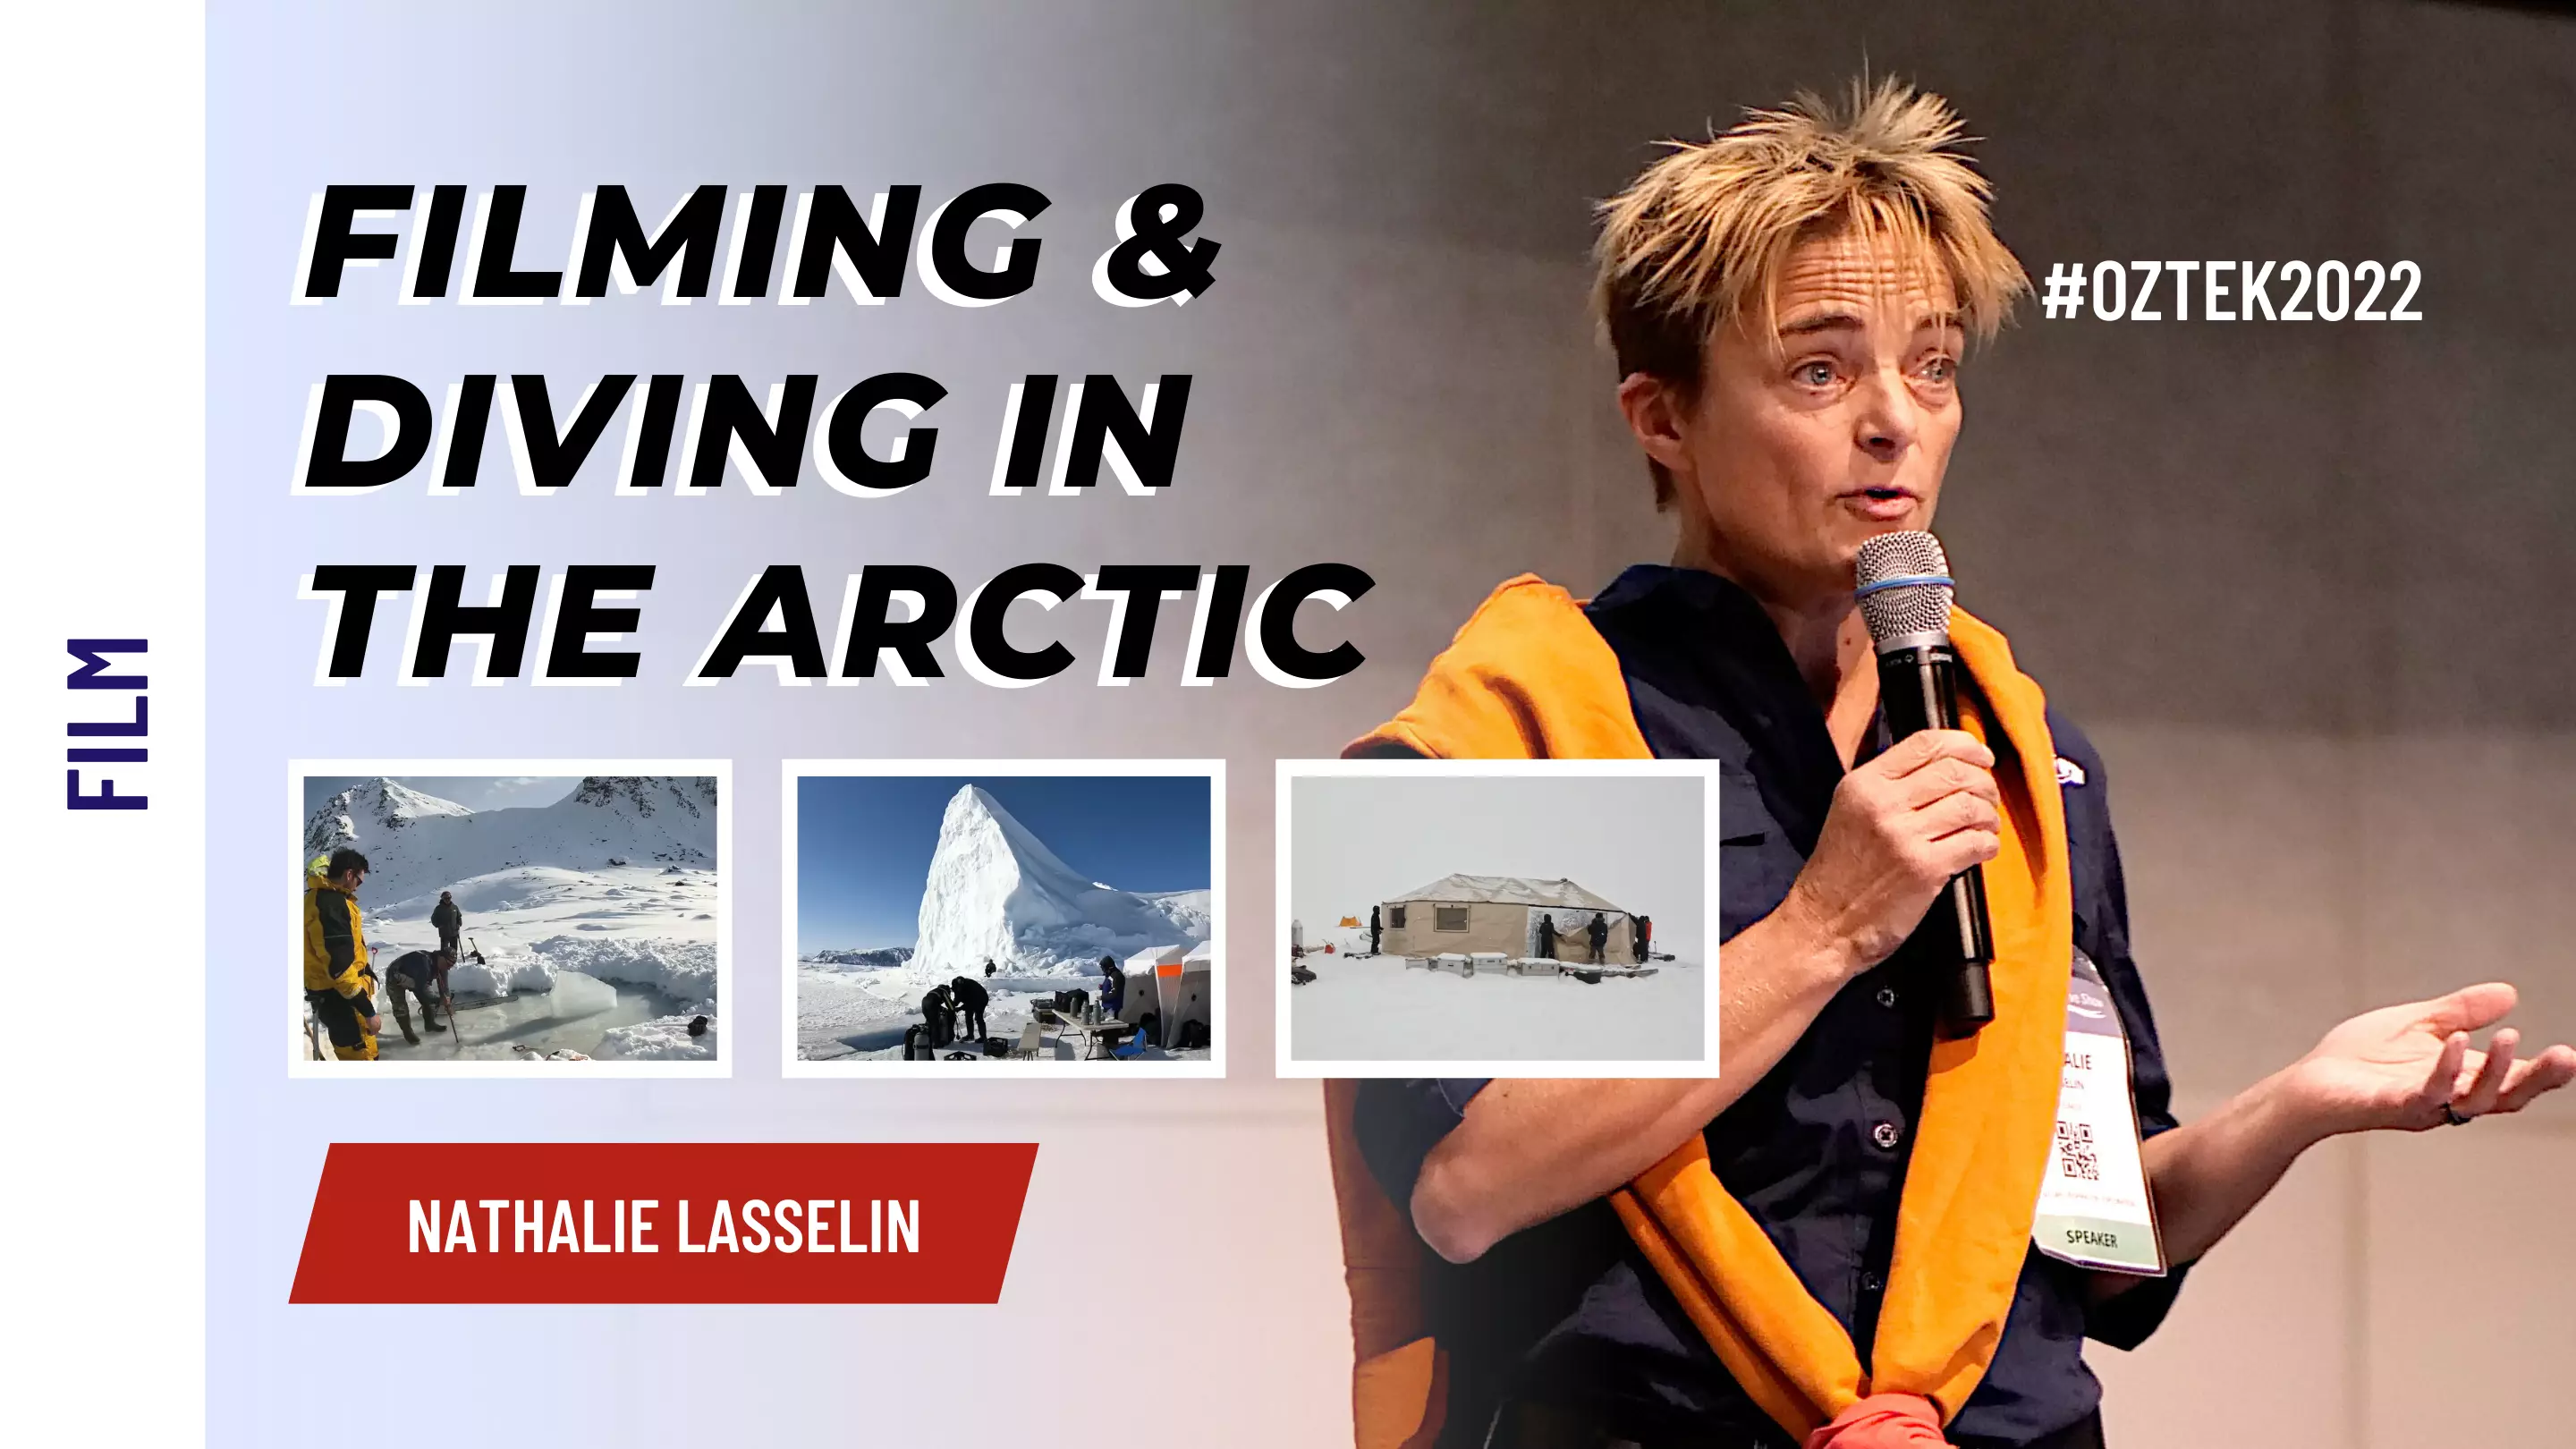 Nathalie Lasselin - A day at the office: Filming and Diving in the Arctic | OZTek2022 Film